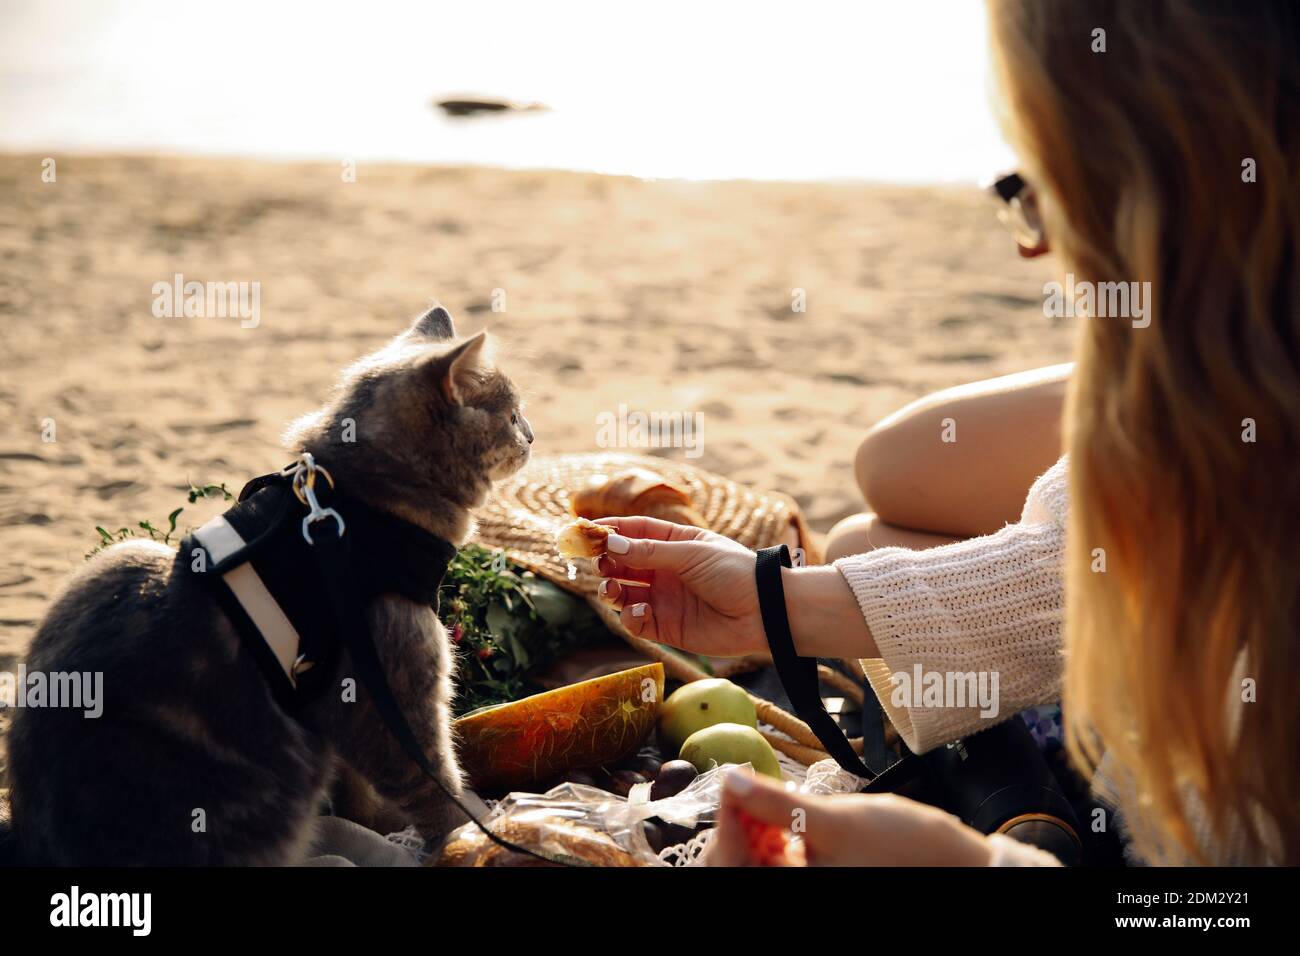 This stock photo shows a Scottish Straight gray cat with a leash on the beach on a sunny day Stock Photo